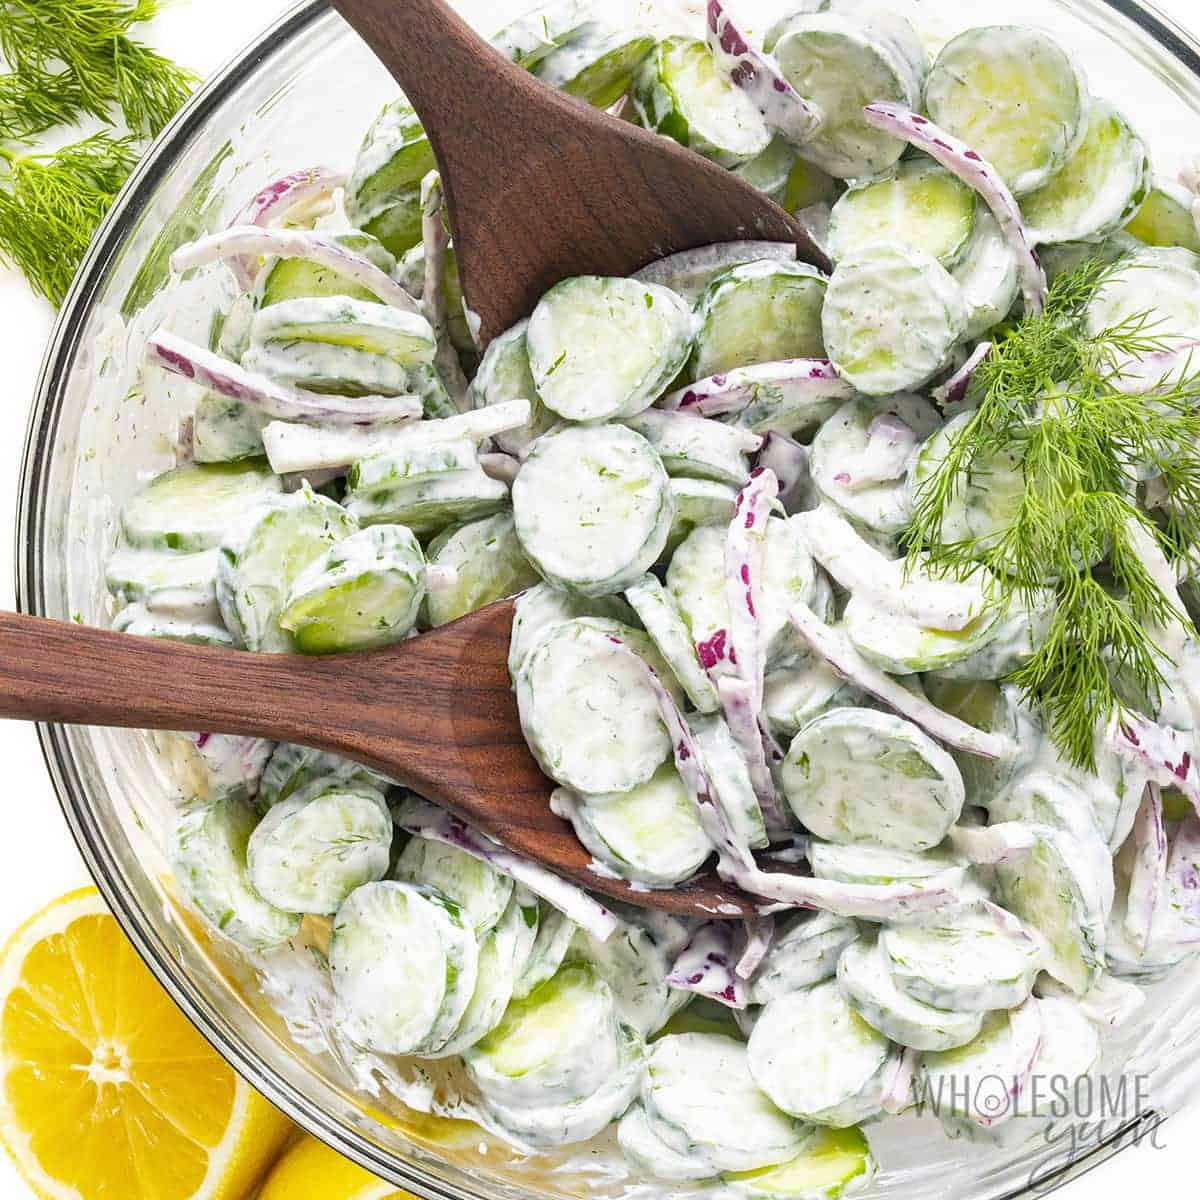 Creamy cucumber salad recipe with sour cream and dill, in a bowl.